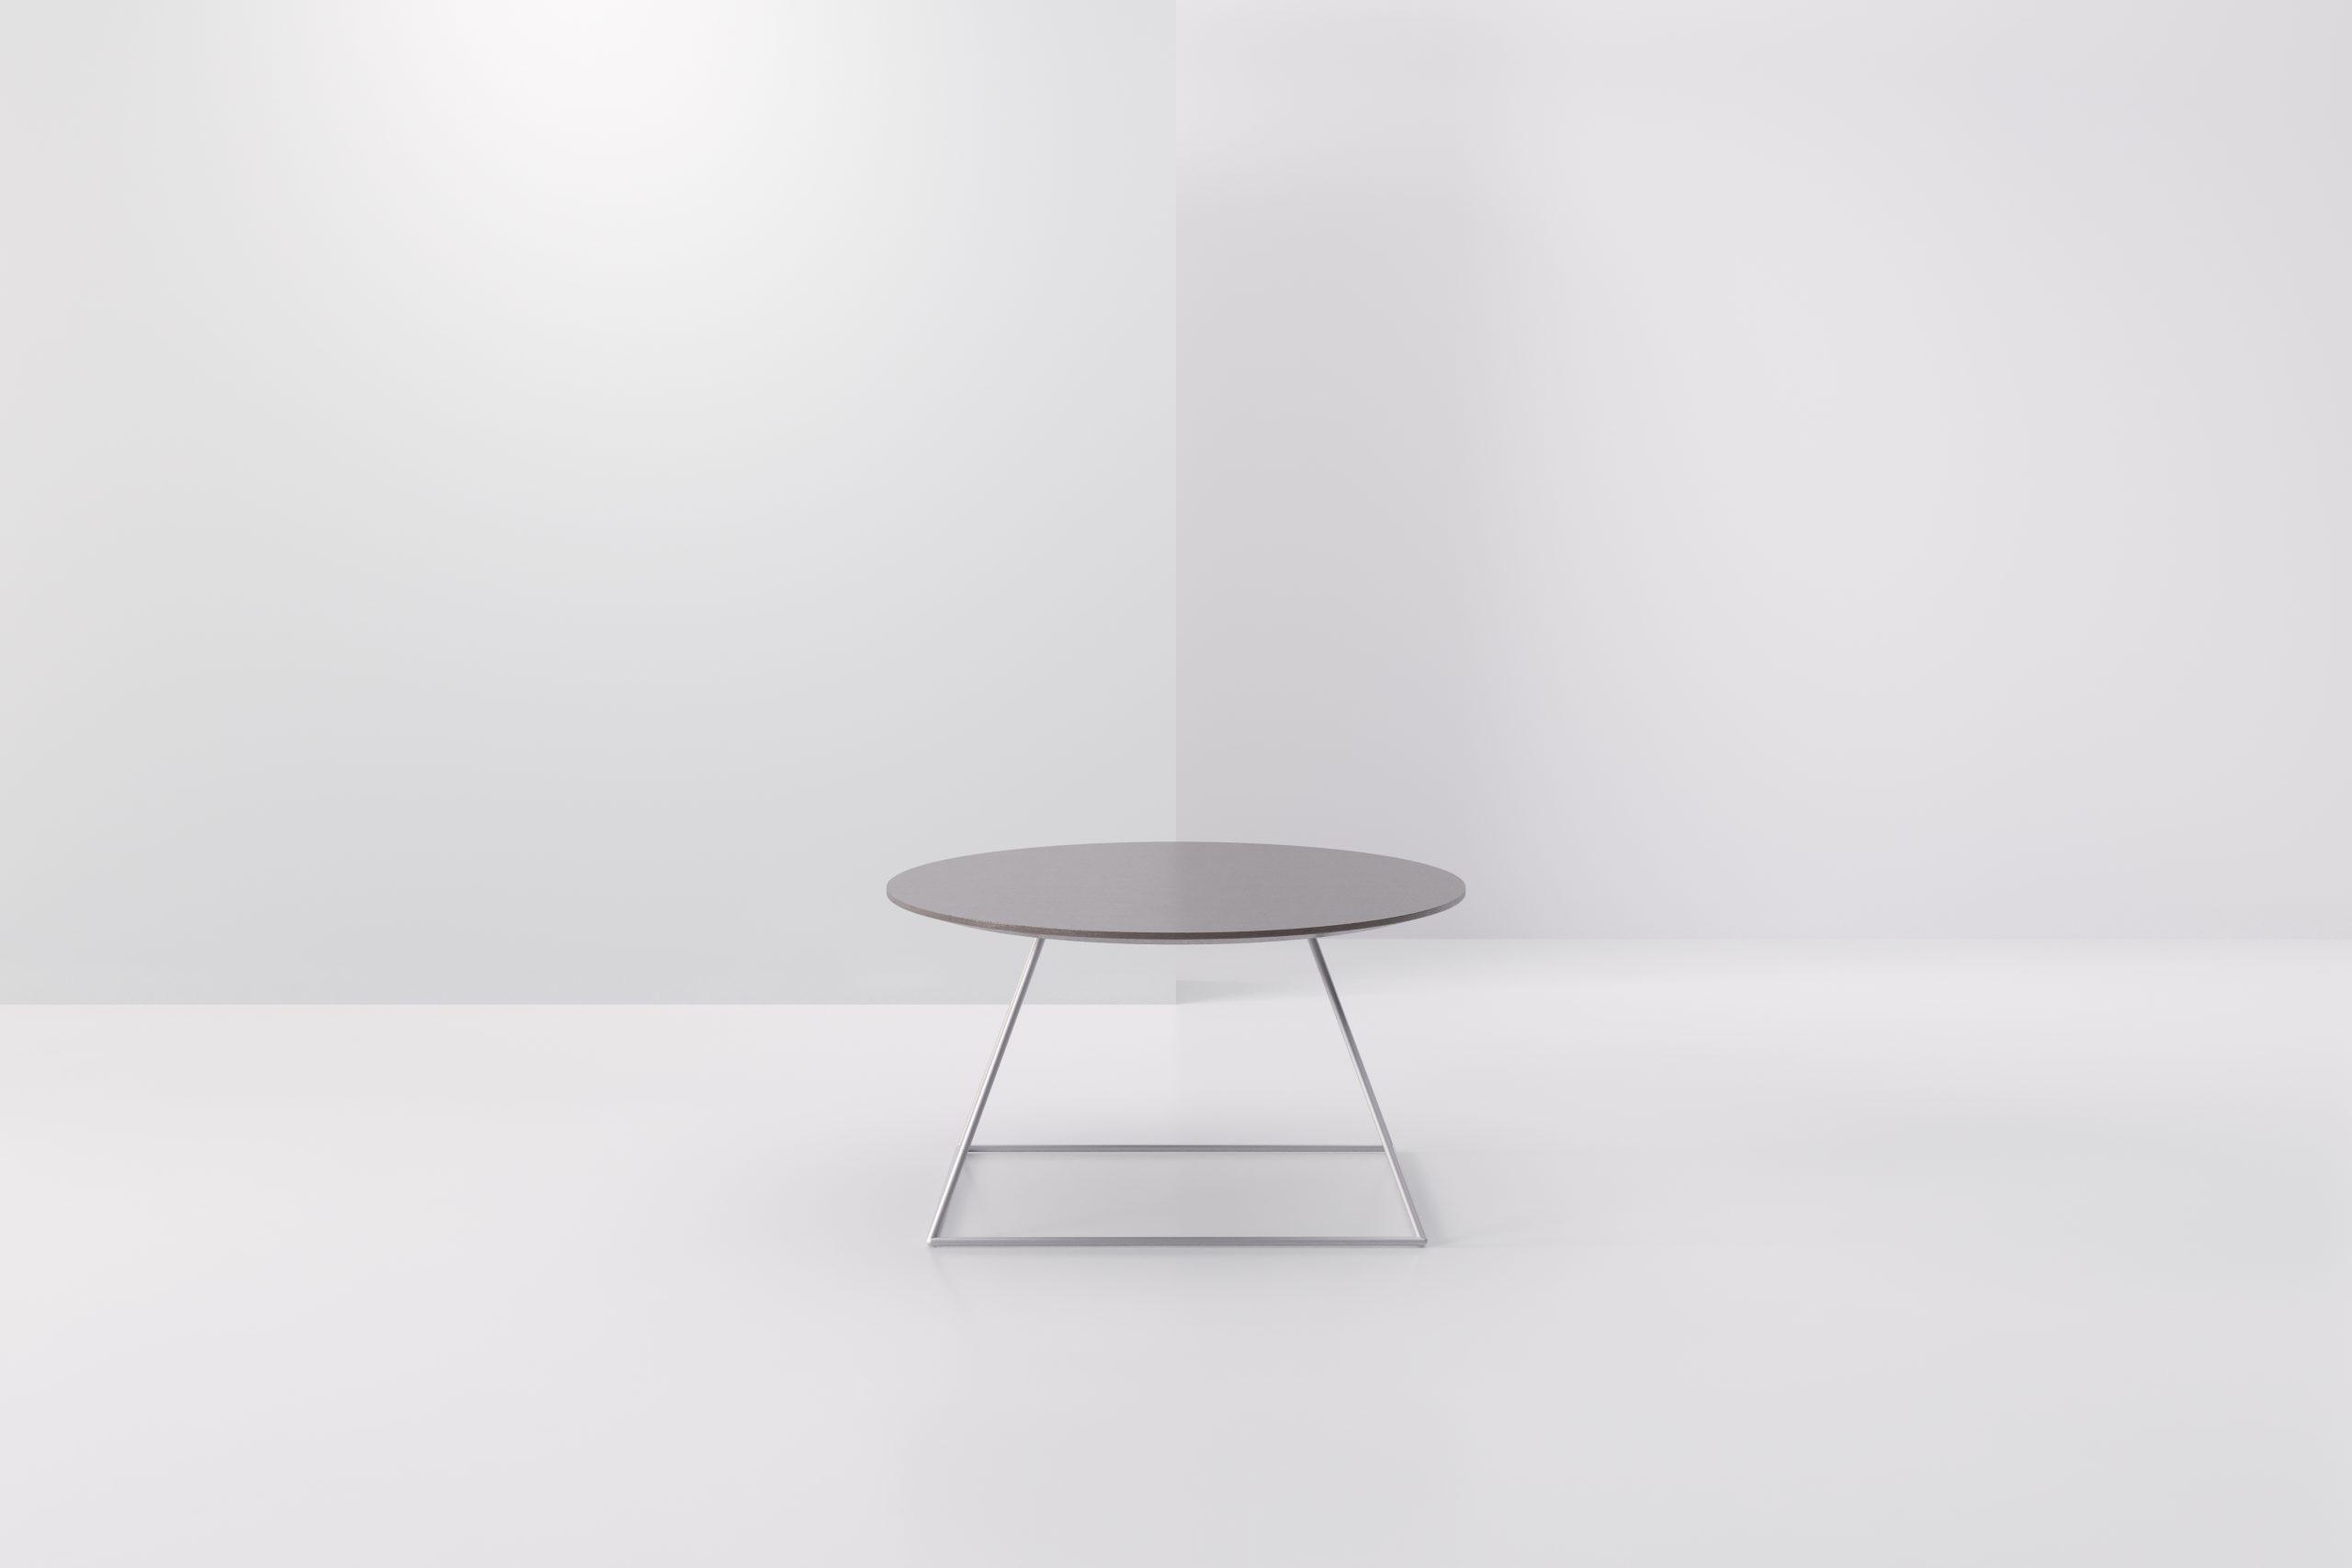 Dayton Large Oval Cocktail Table Product Image 2